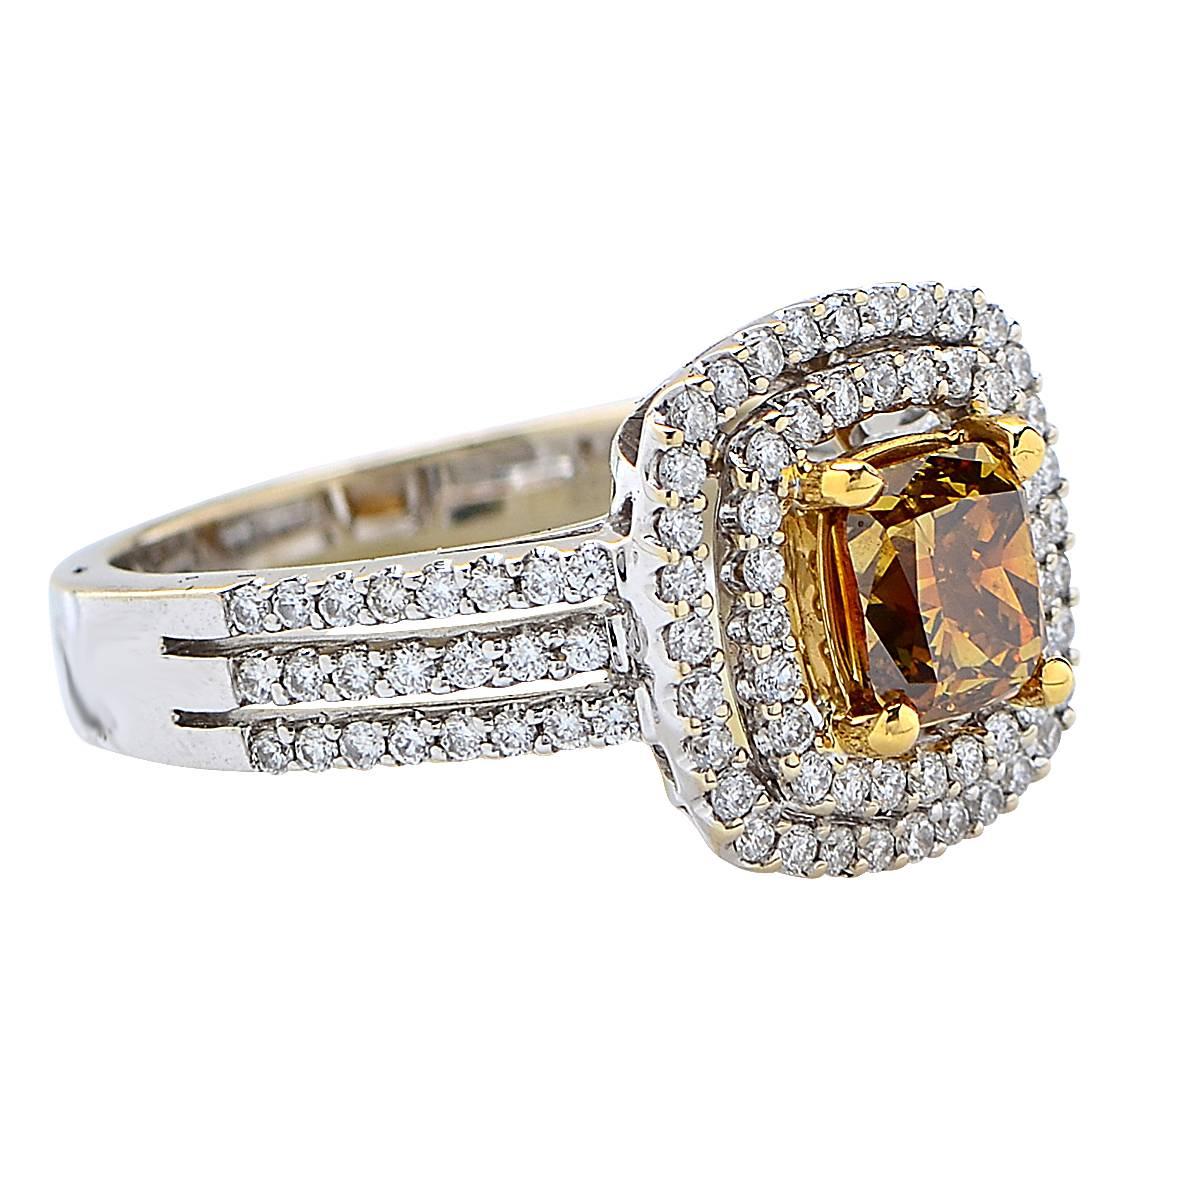 Stunning engagement ring crafted in 18 Karat Yellow and White Gold, showcasing a GIA Certified Fancy Deep Brownish Yellow radiant cut diamond weighing 1.23 carats adorned by 102 round brilliant cut diamonds weighing approximately .59 carats total, G